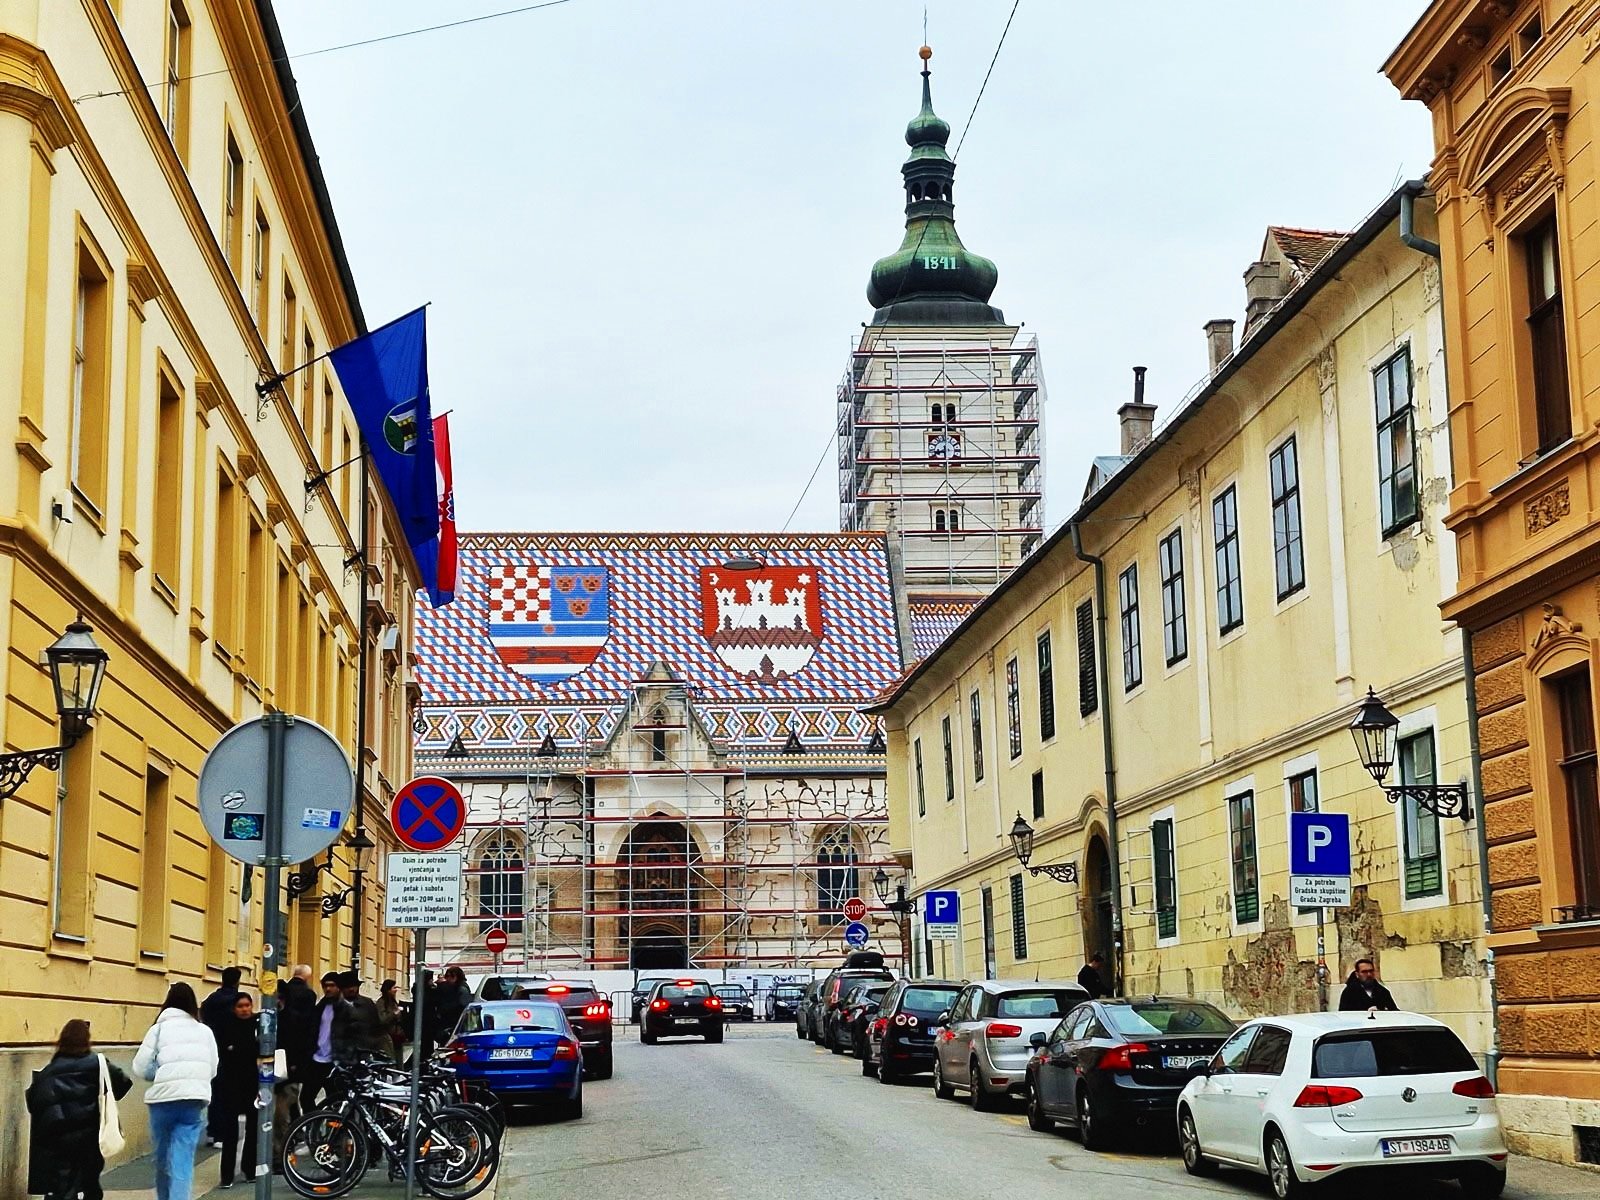 a church with shield pattern tiles in red, white and blue on the roof in Zagreb, Croatia